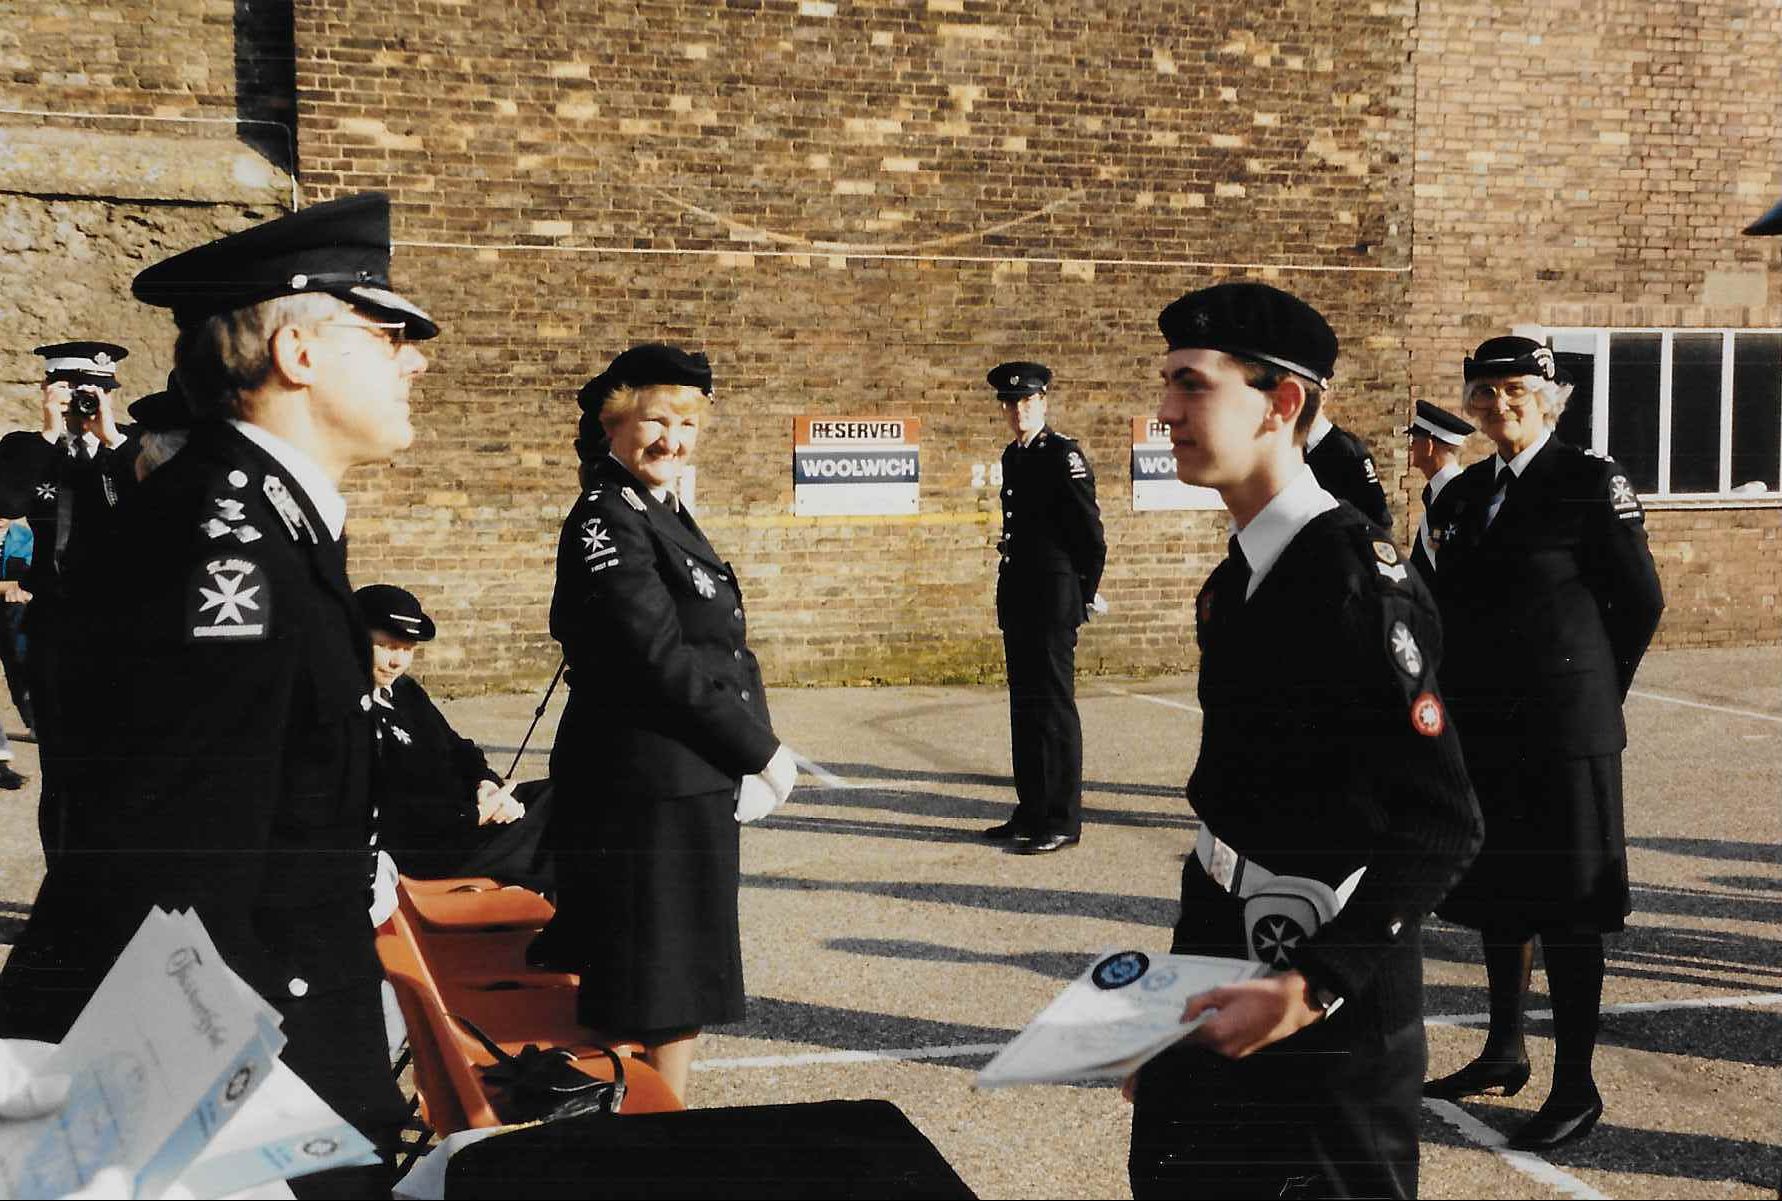 Colour photograph of a male Cadets being met by a group of adults in St John Ambulance uniform. They are standing outside with the brick wall of a building visible behind them.